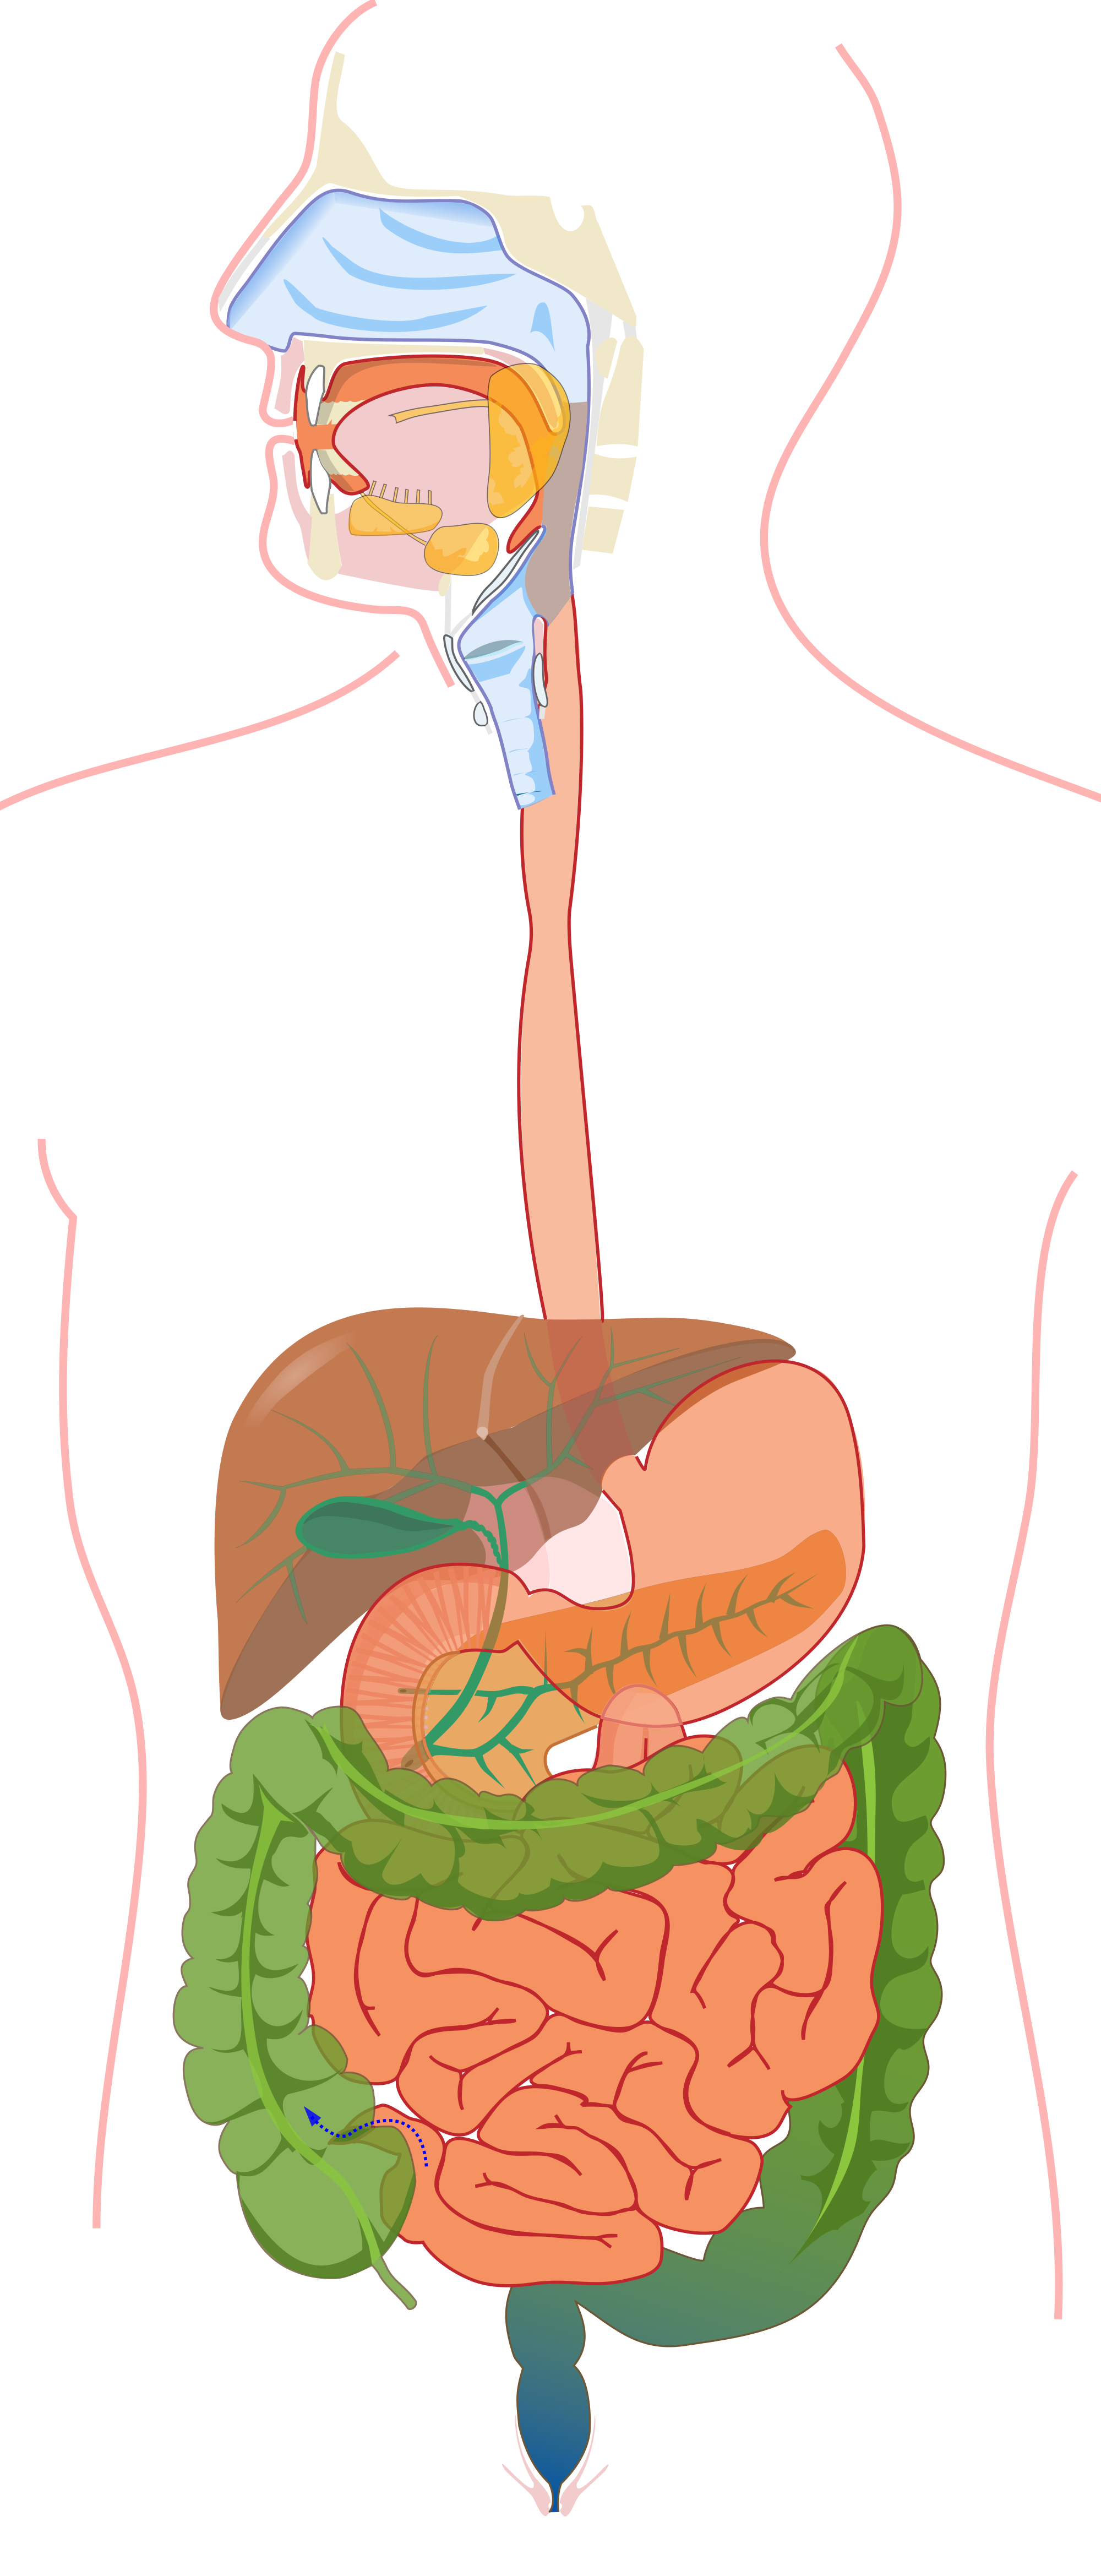 The importance of healthy. Hurt clipart diarrhea